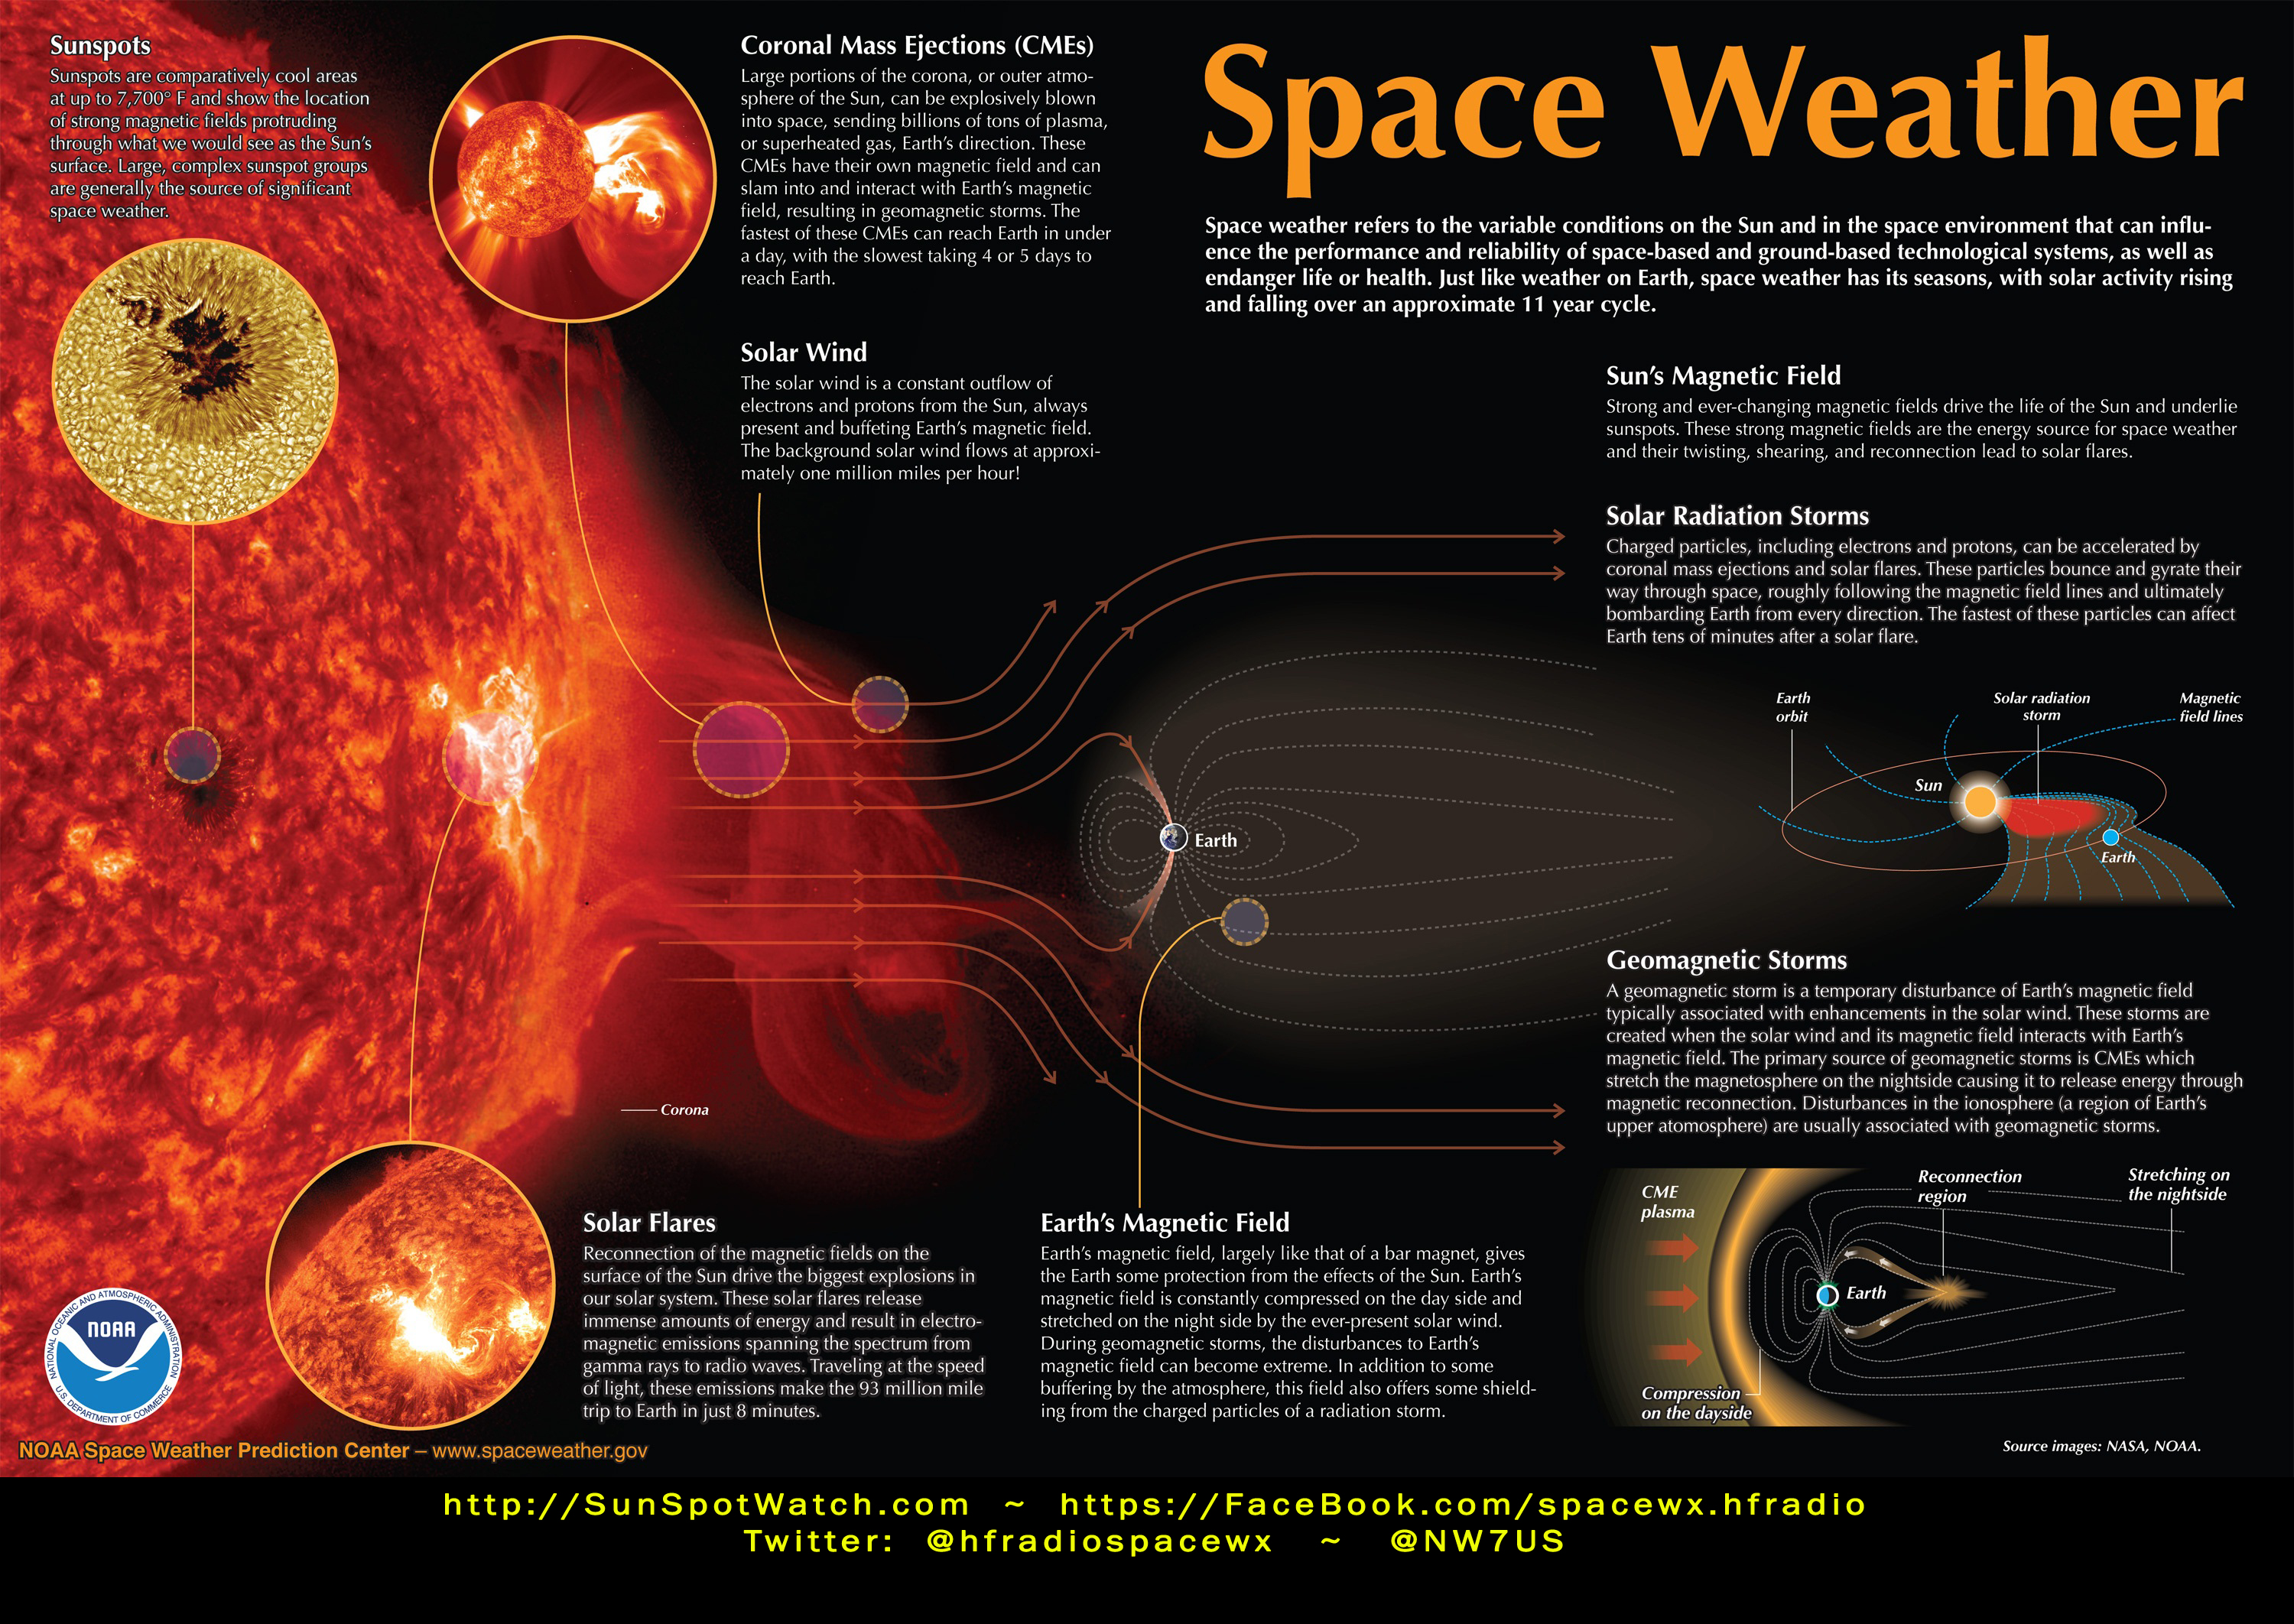 What is Space Weather? Slide 1 of 2